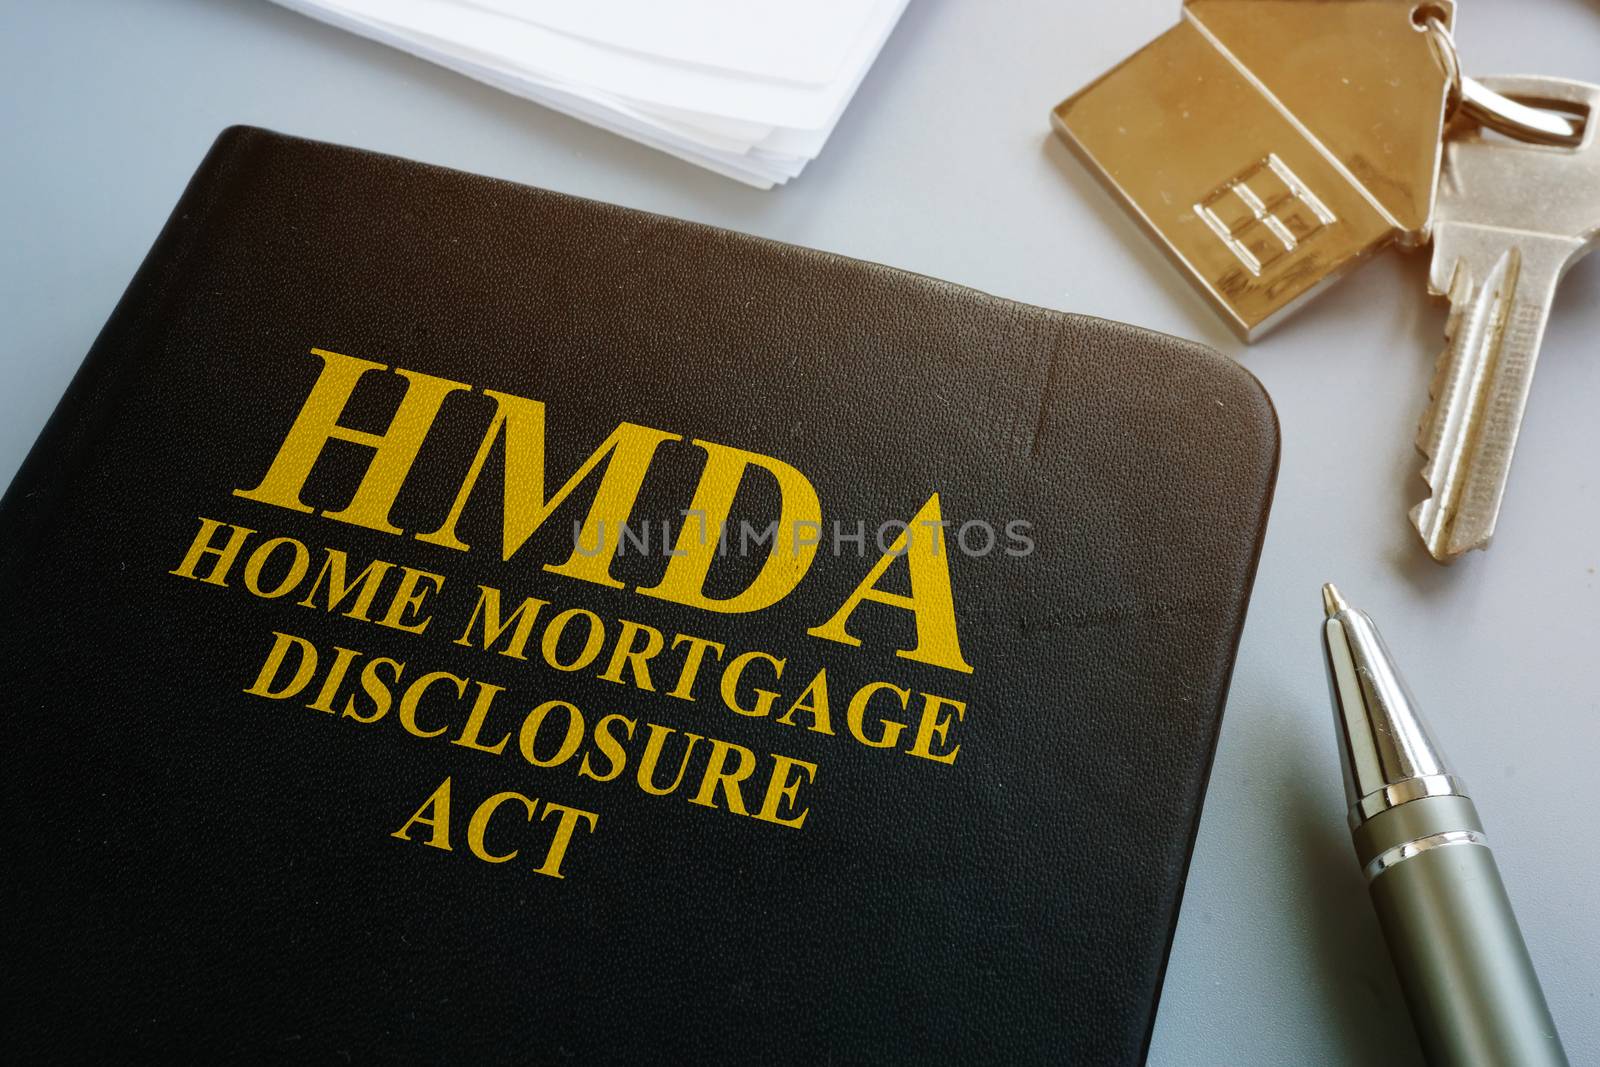 Home Mortgage Disclosure Act HMDA on the desk. by designer491